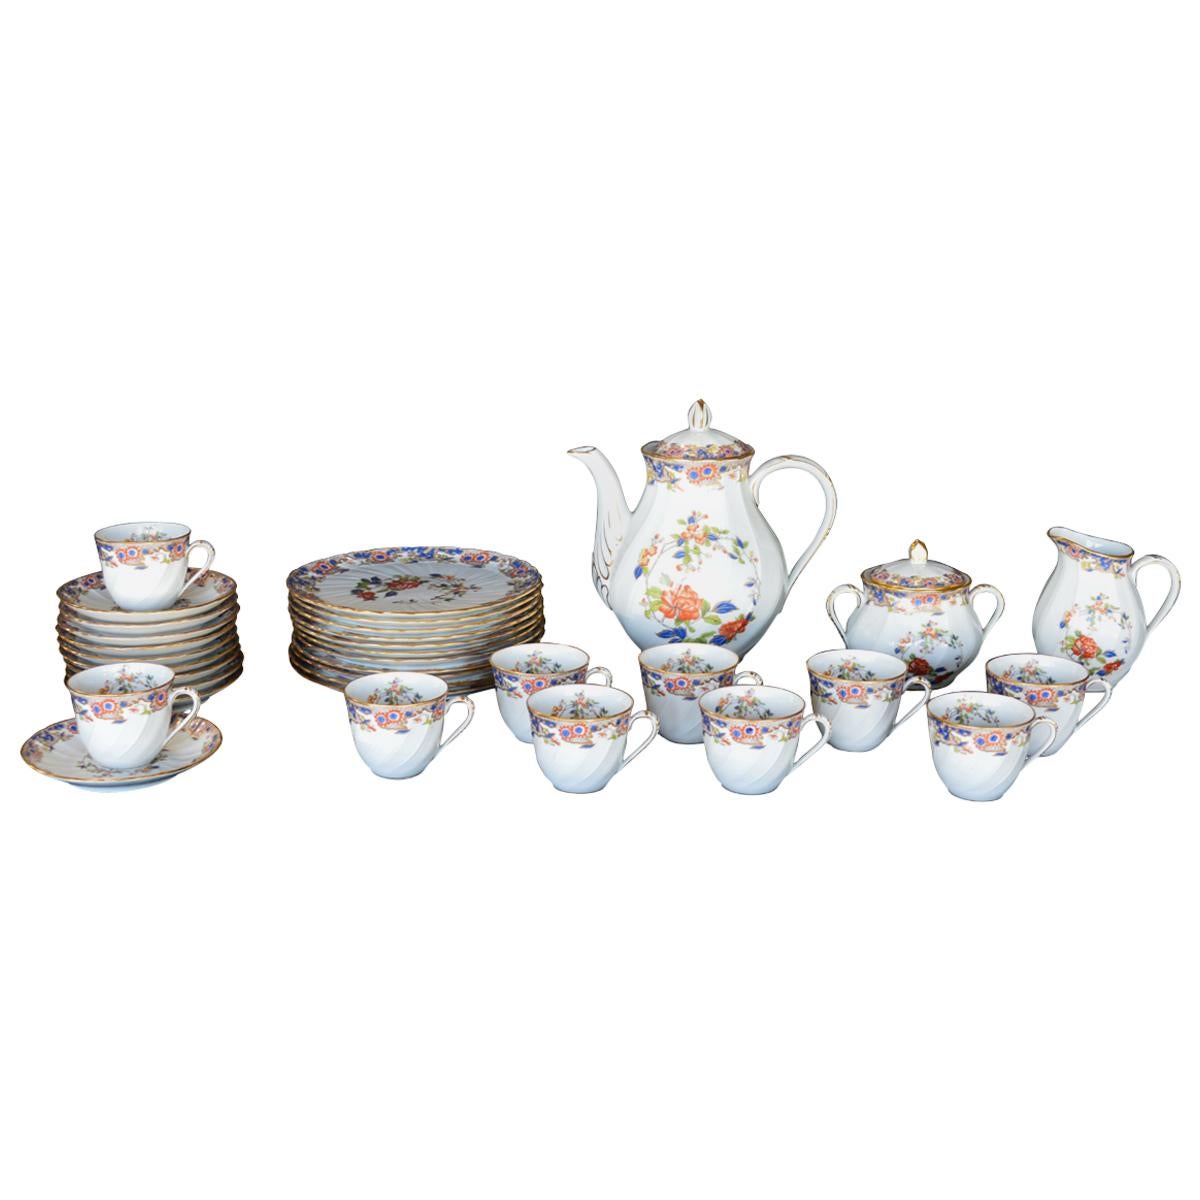 Early 20th Century French Tea Set by Bernardaud Limoges